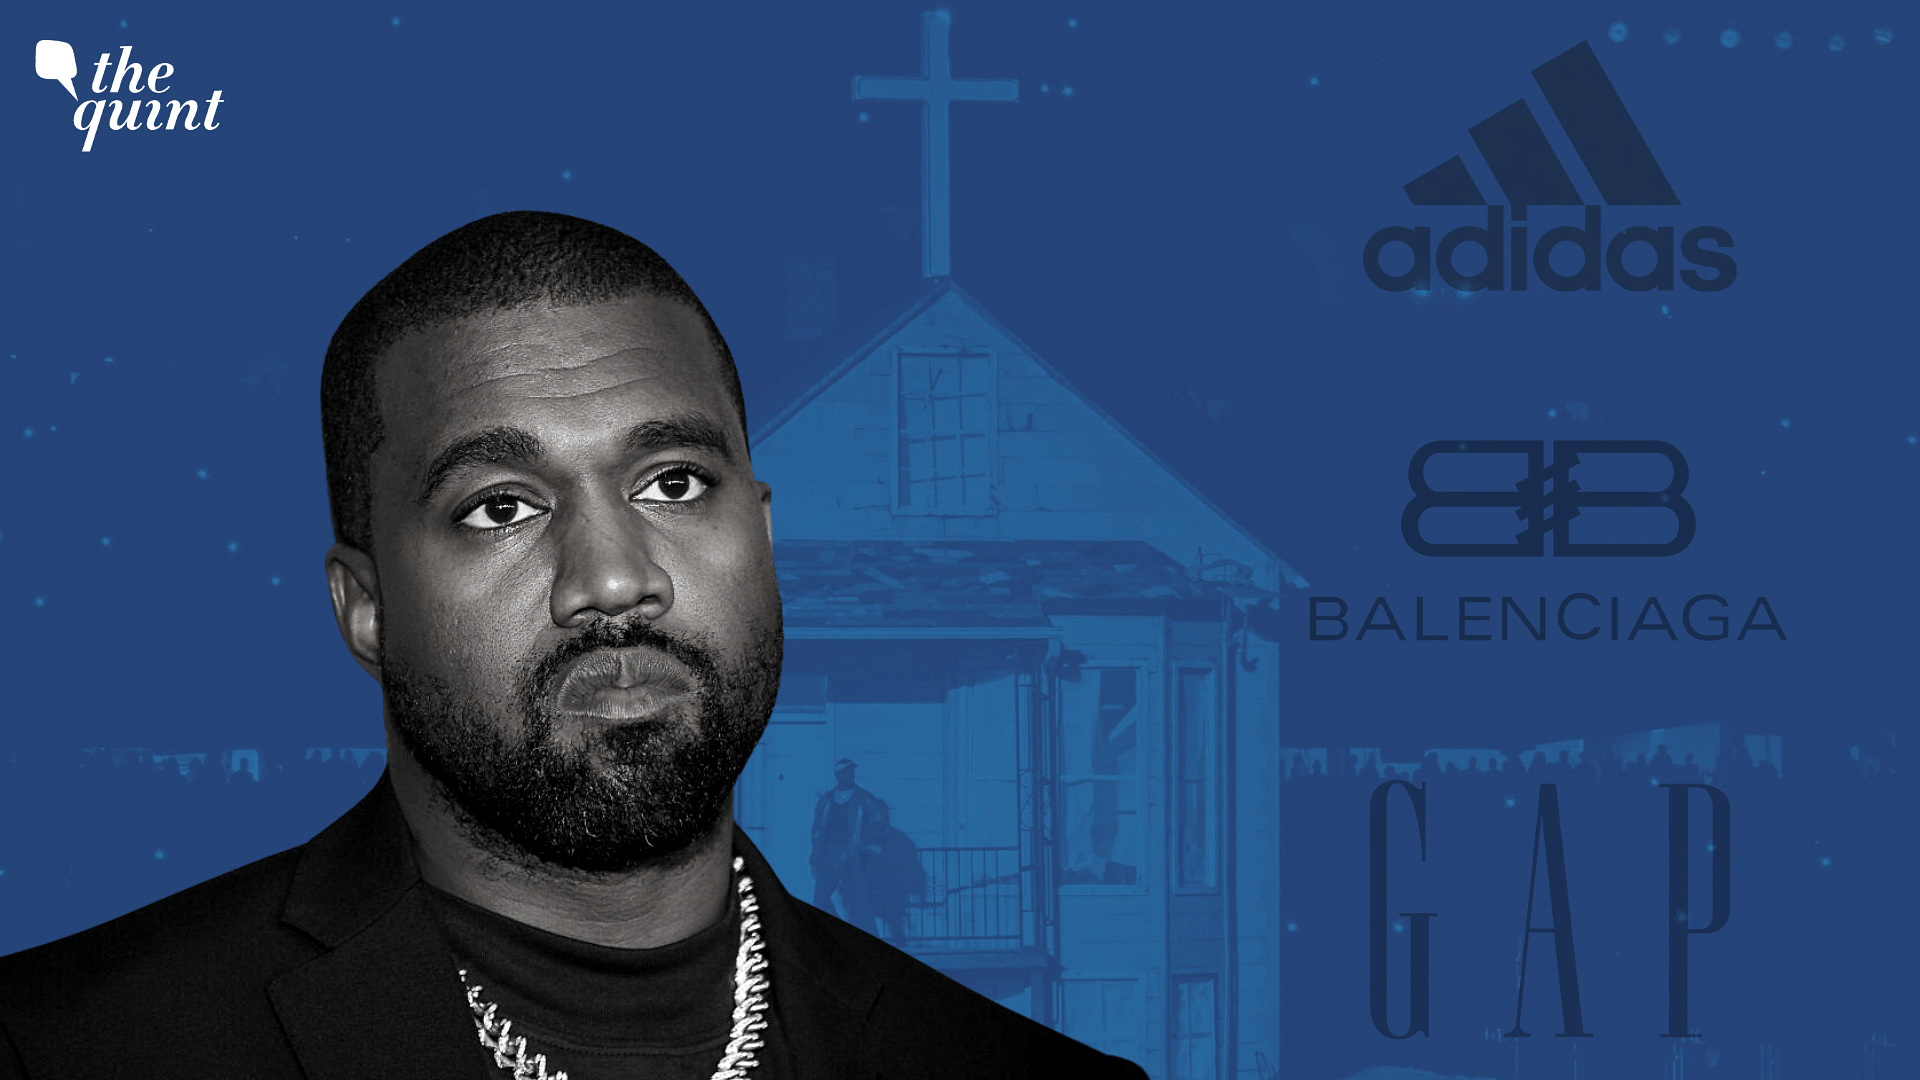 <div class="paragraphs"><p>Musician and mogul <a href="https://www.thequint.com/topic/kanye-west">Ye</a>, who was previously known as <a href="https://www.thequint.com/topic/kanye-west">Kanye West</a> has been slammed for a recent slew of <a href="https://www.thequint.com/news/world/kristallnacht-when-nazi-germany-formalised-anti-semitic-violence">anti-semitic</a> comments.</p></div>